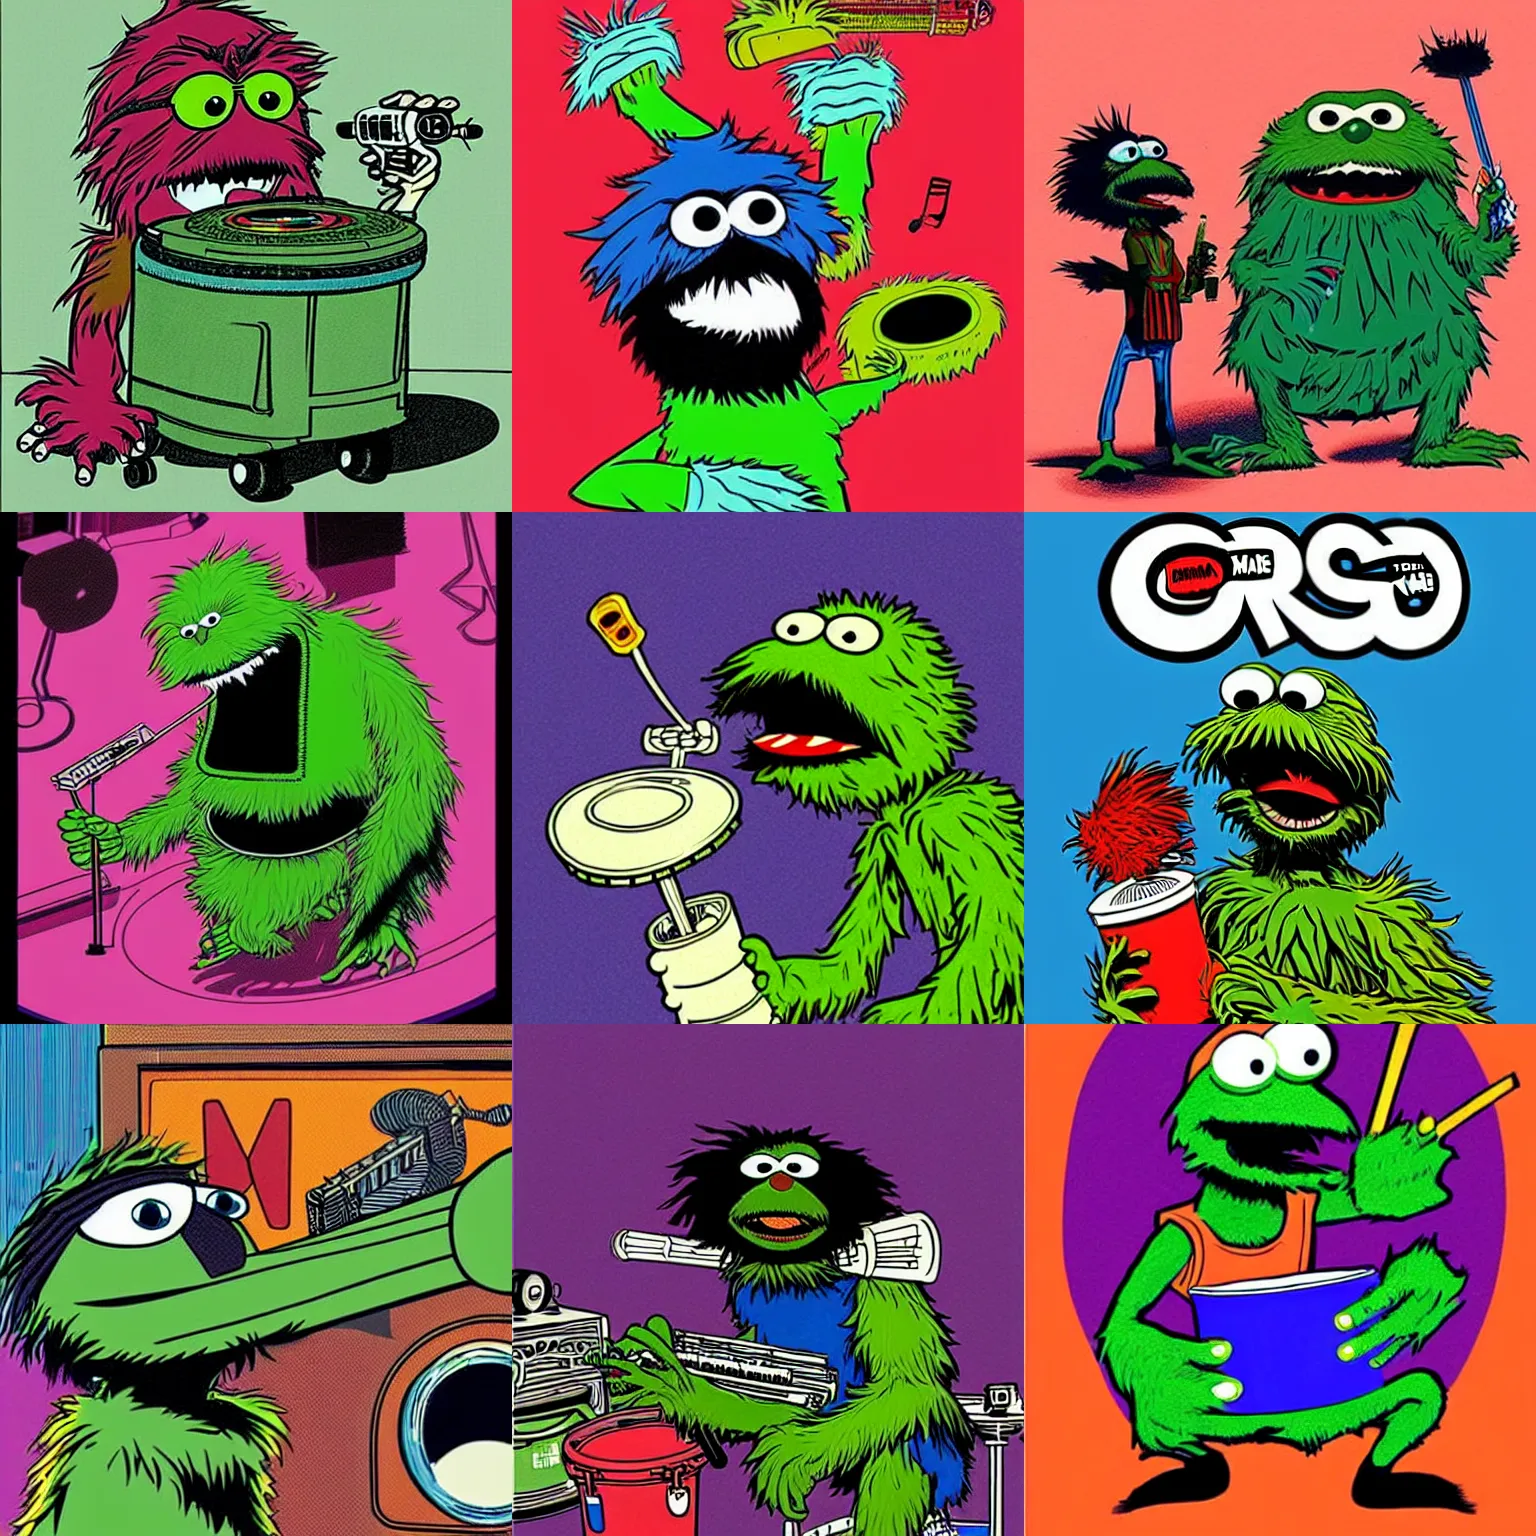 Prompt: oscar the grouch illustrated by jamie hewlett making music with the gorillaz, very detailed, colorful, crazy